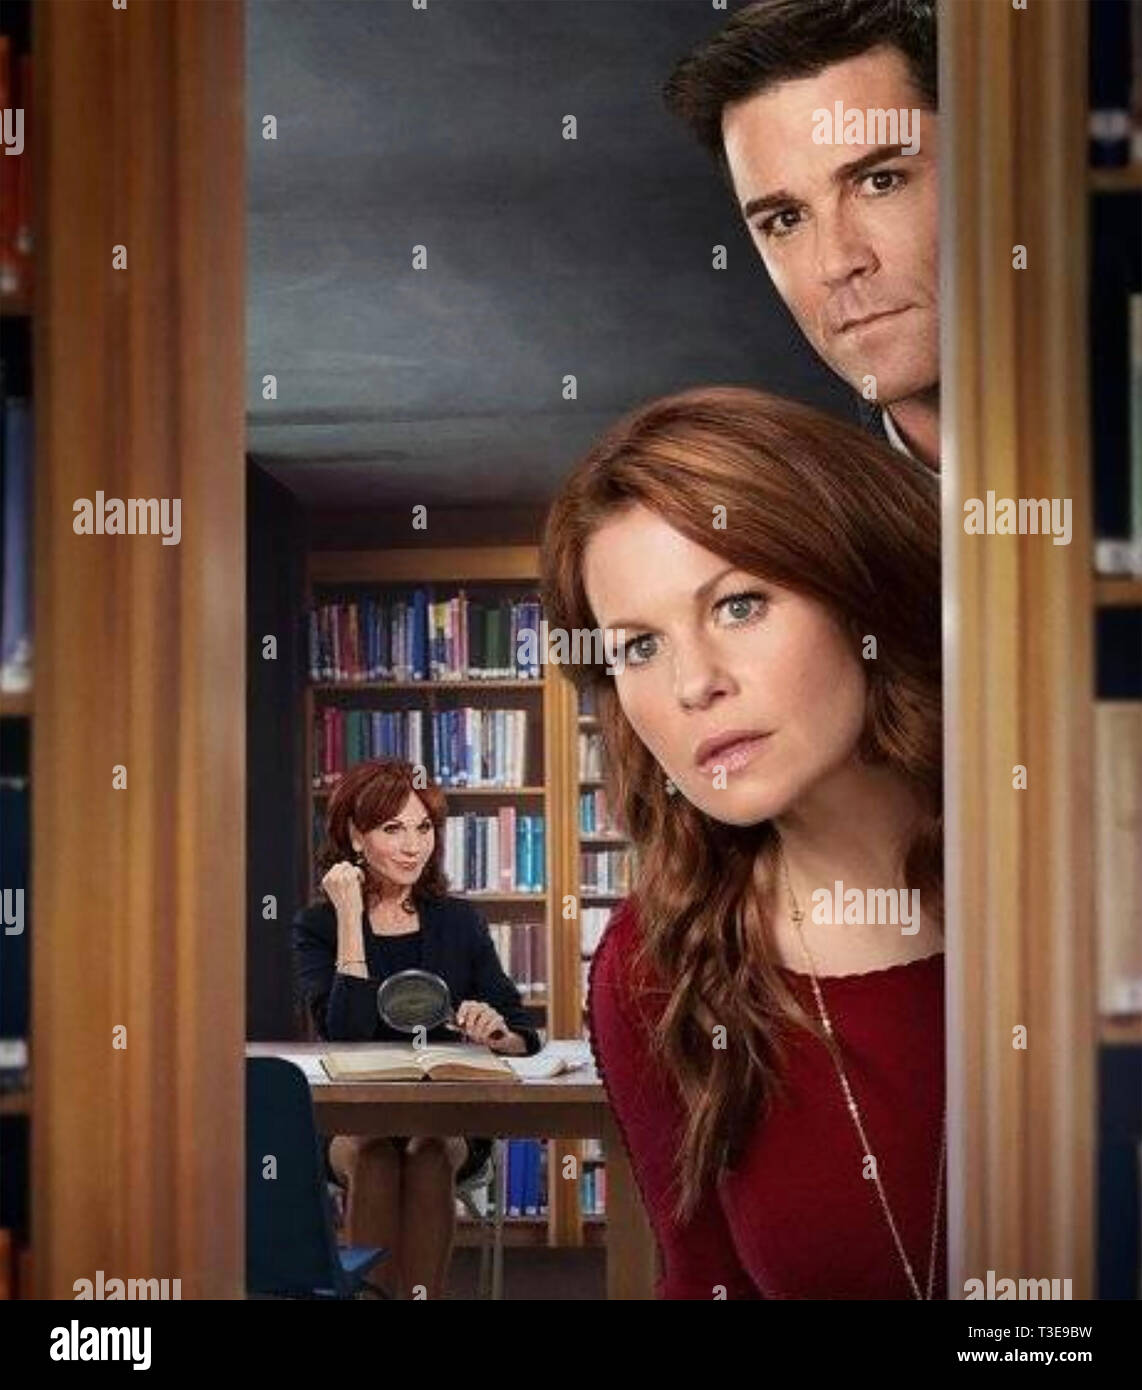 DEAD OVER HEELS; AN AURORA TEAGARDEN MYSTERY 2017 Muse Enterainment Enterprises film with from left: Marilu Henner, Candace Cameron Bure, Yannick Bisson Stock Photo